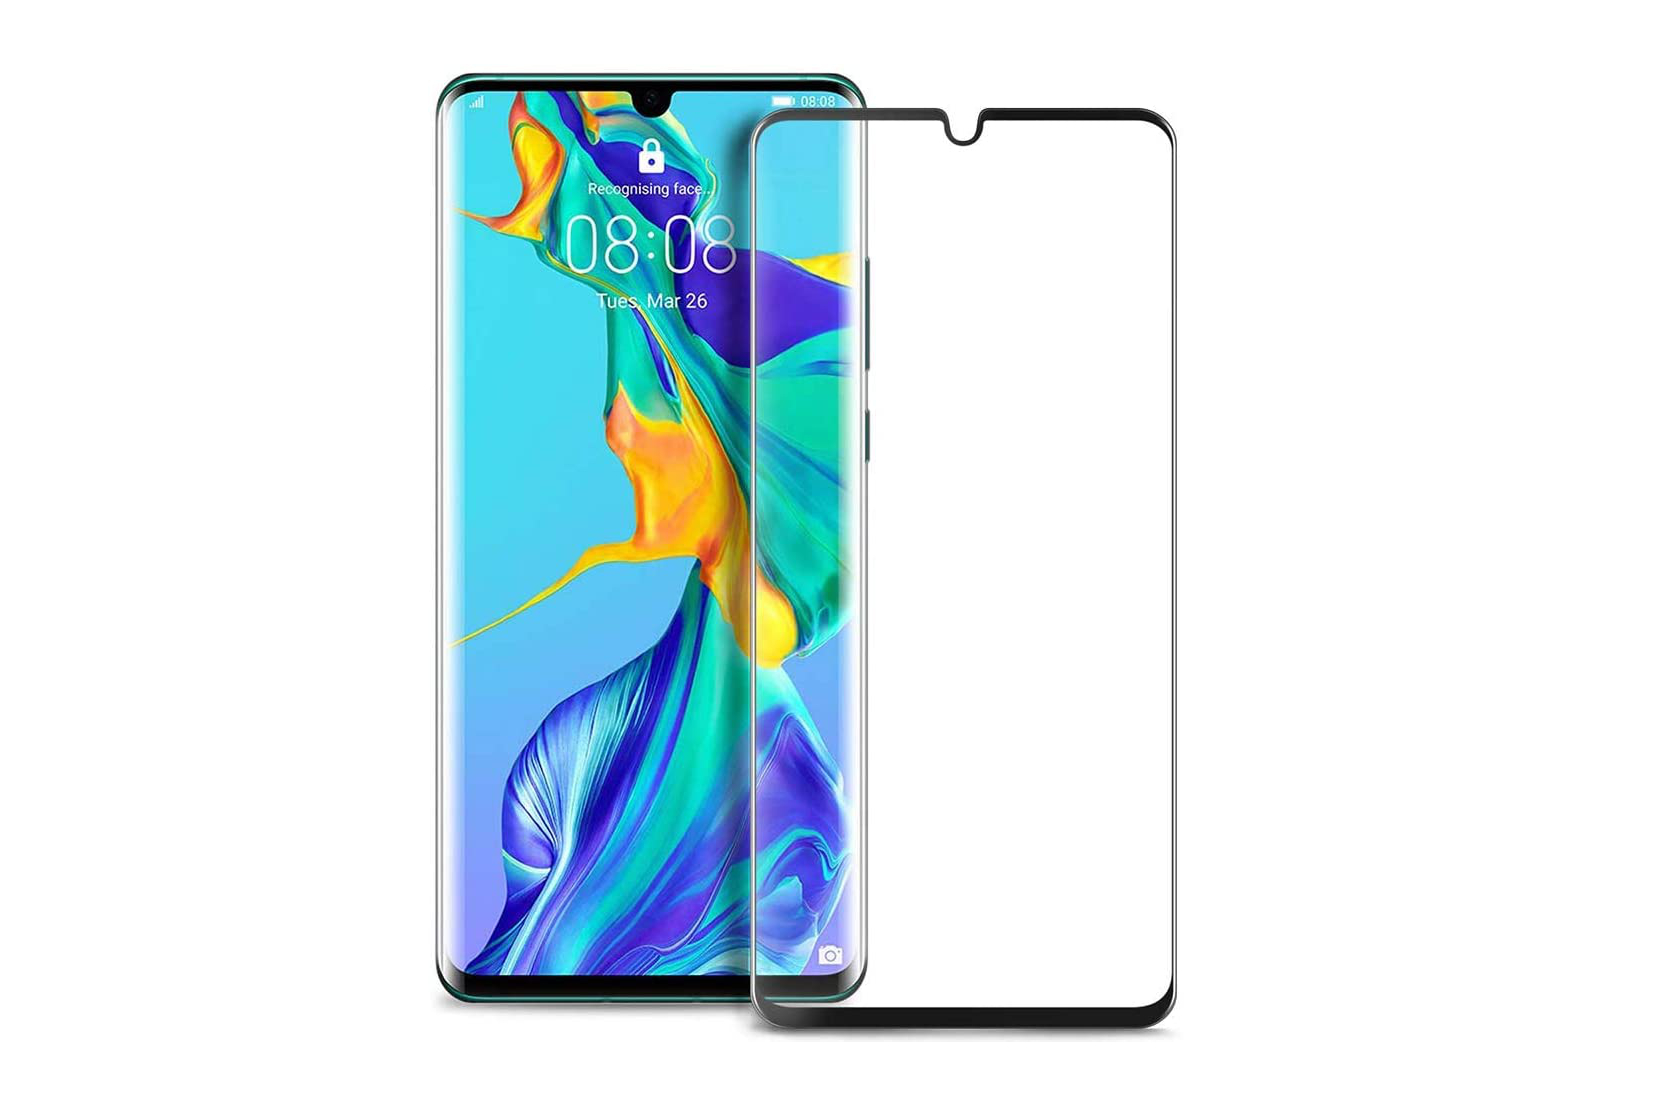 https://www.digitaltrends.com/wp-content/uploads/2021/04/uponew-tempered-glass-screen-protector-for-huawei-p30-pro.jpg?fit=720%2C480&p=1